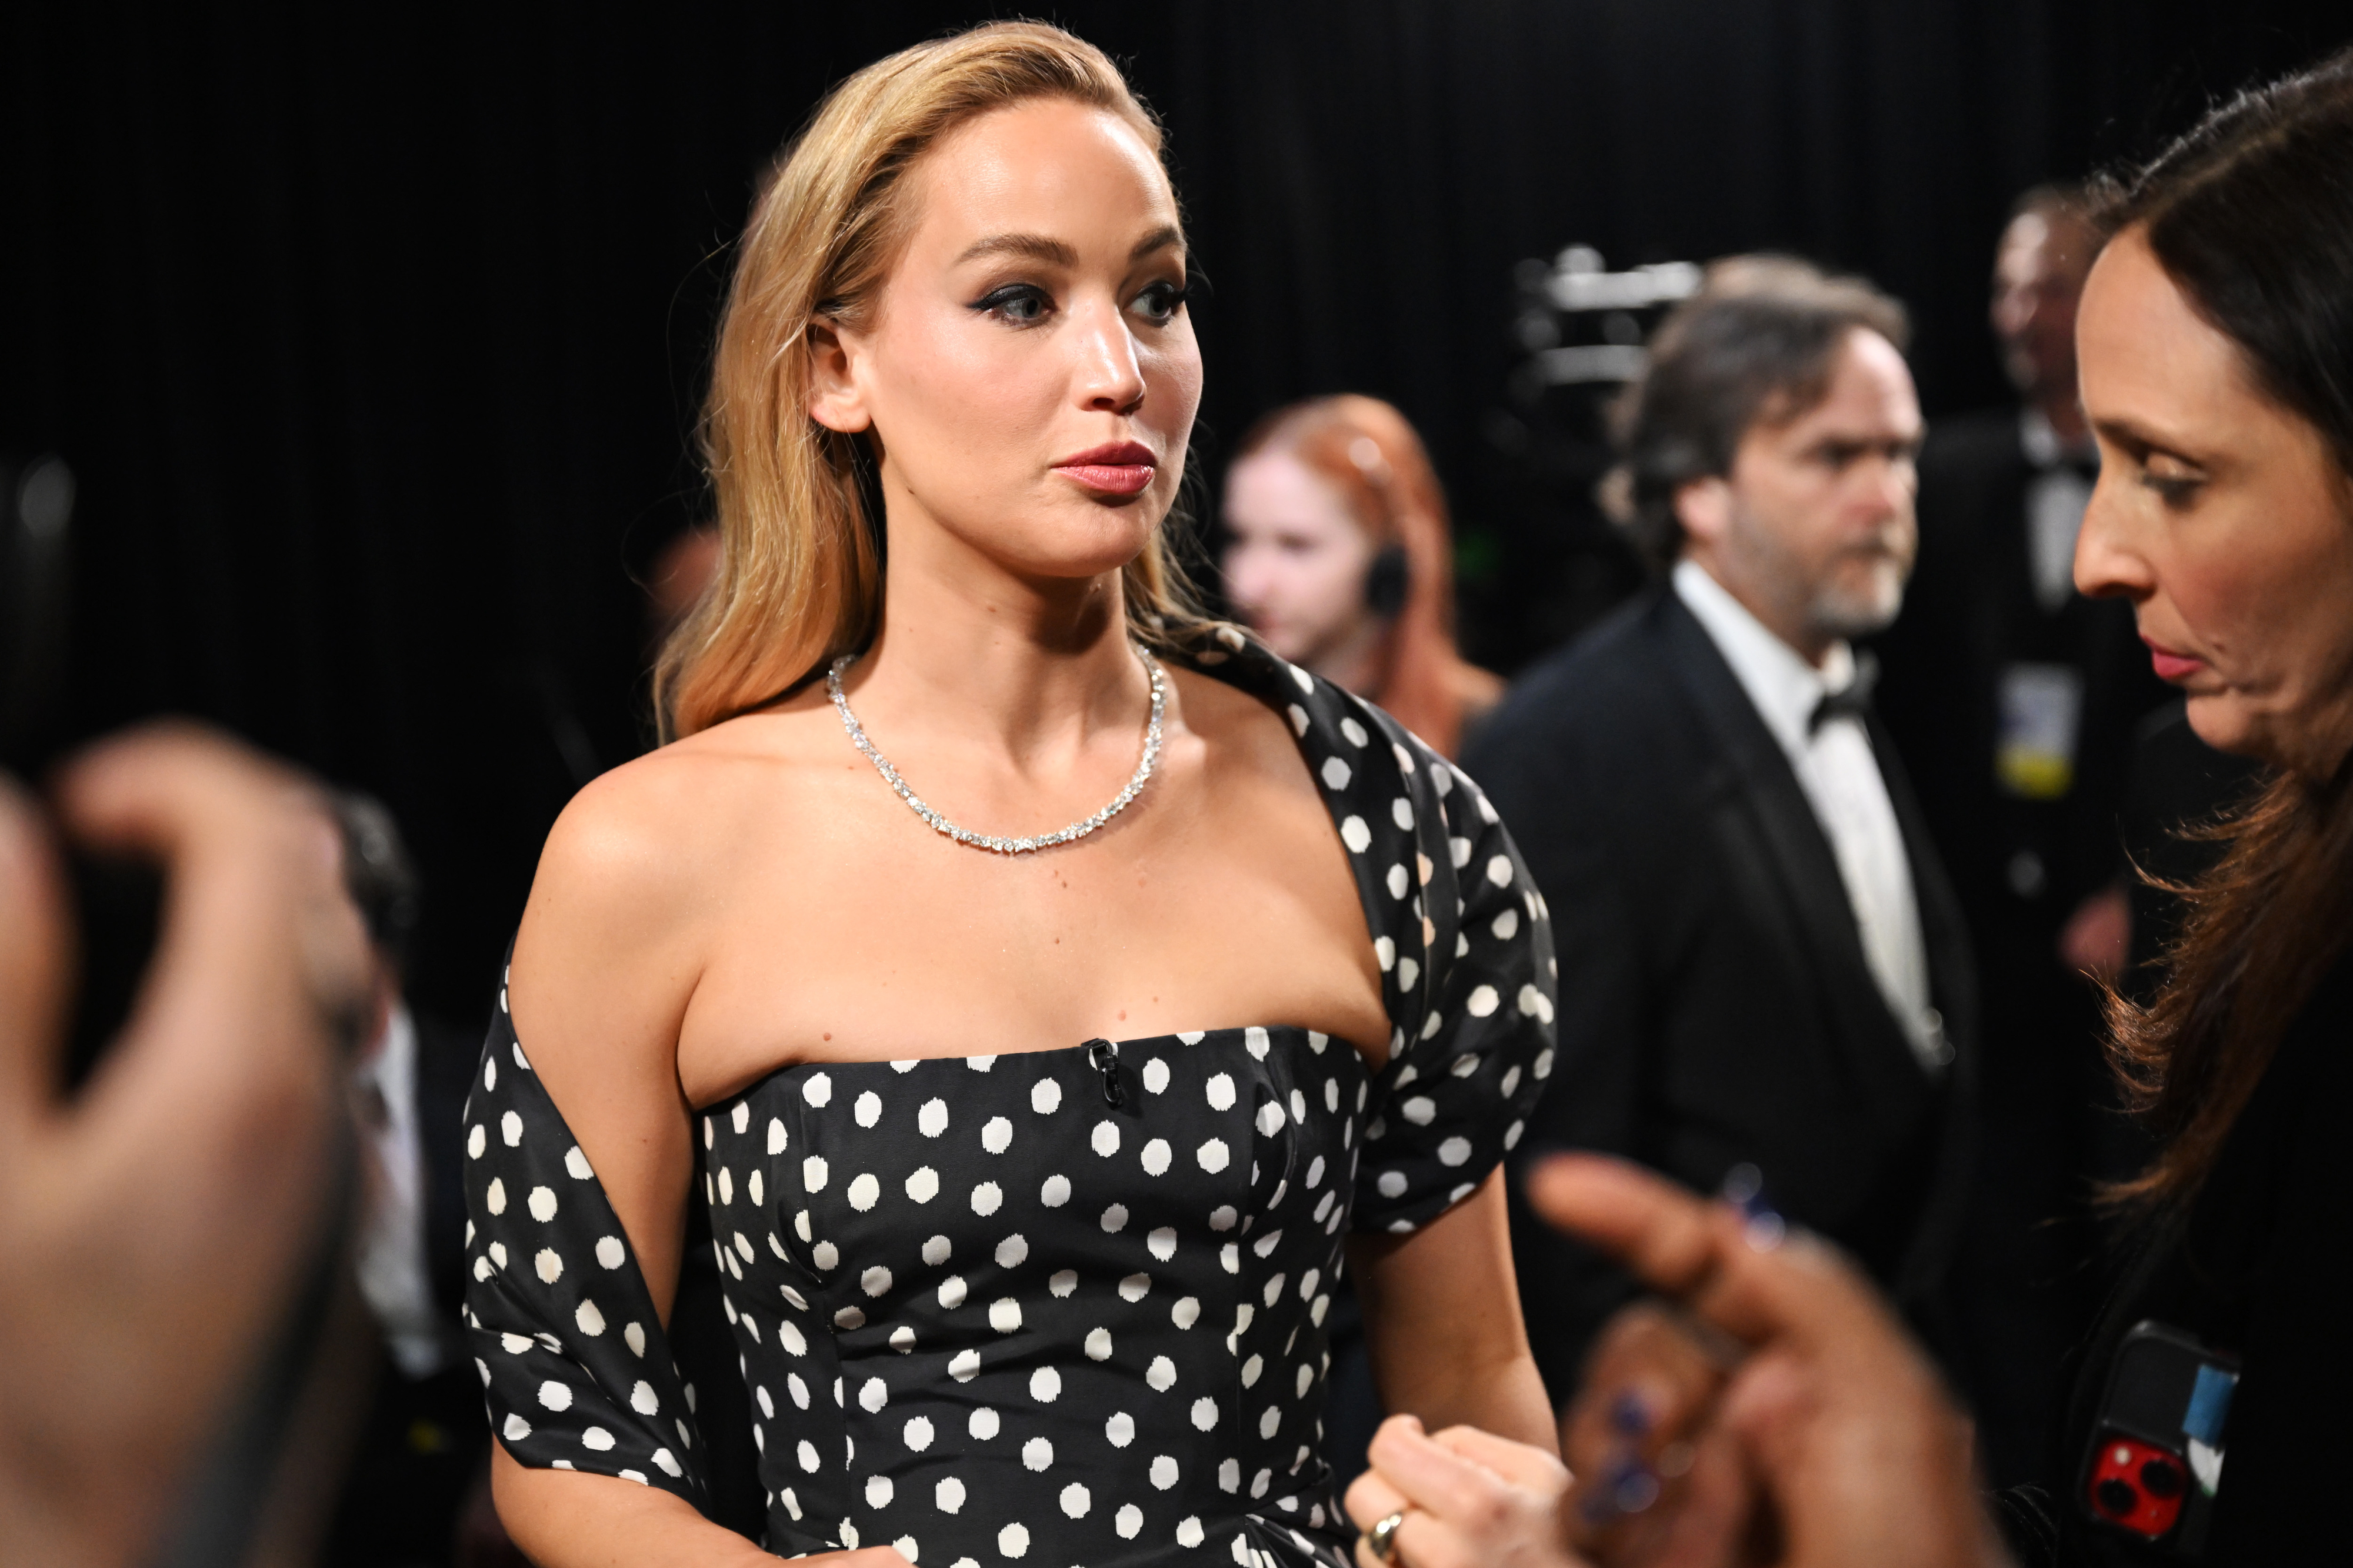 Jennifer in a polka dot outfit with a necklace converses backstage at an event